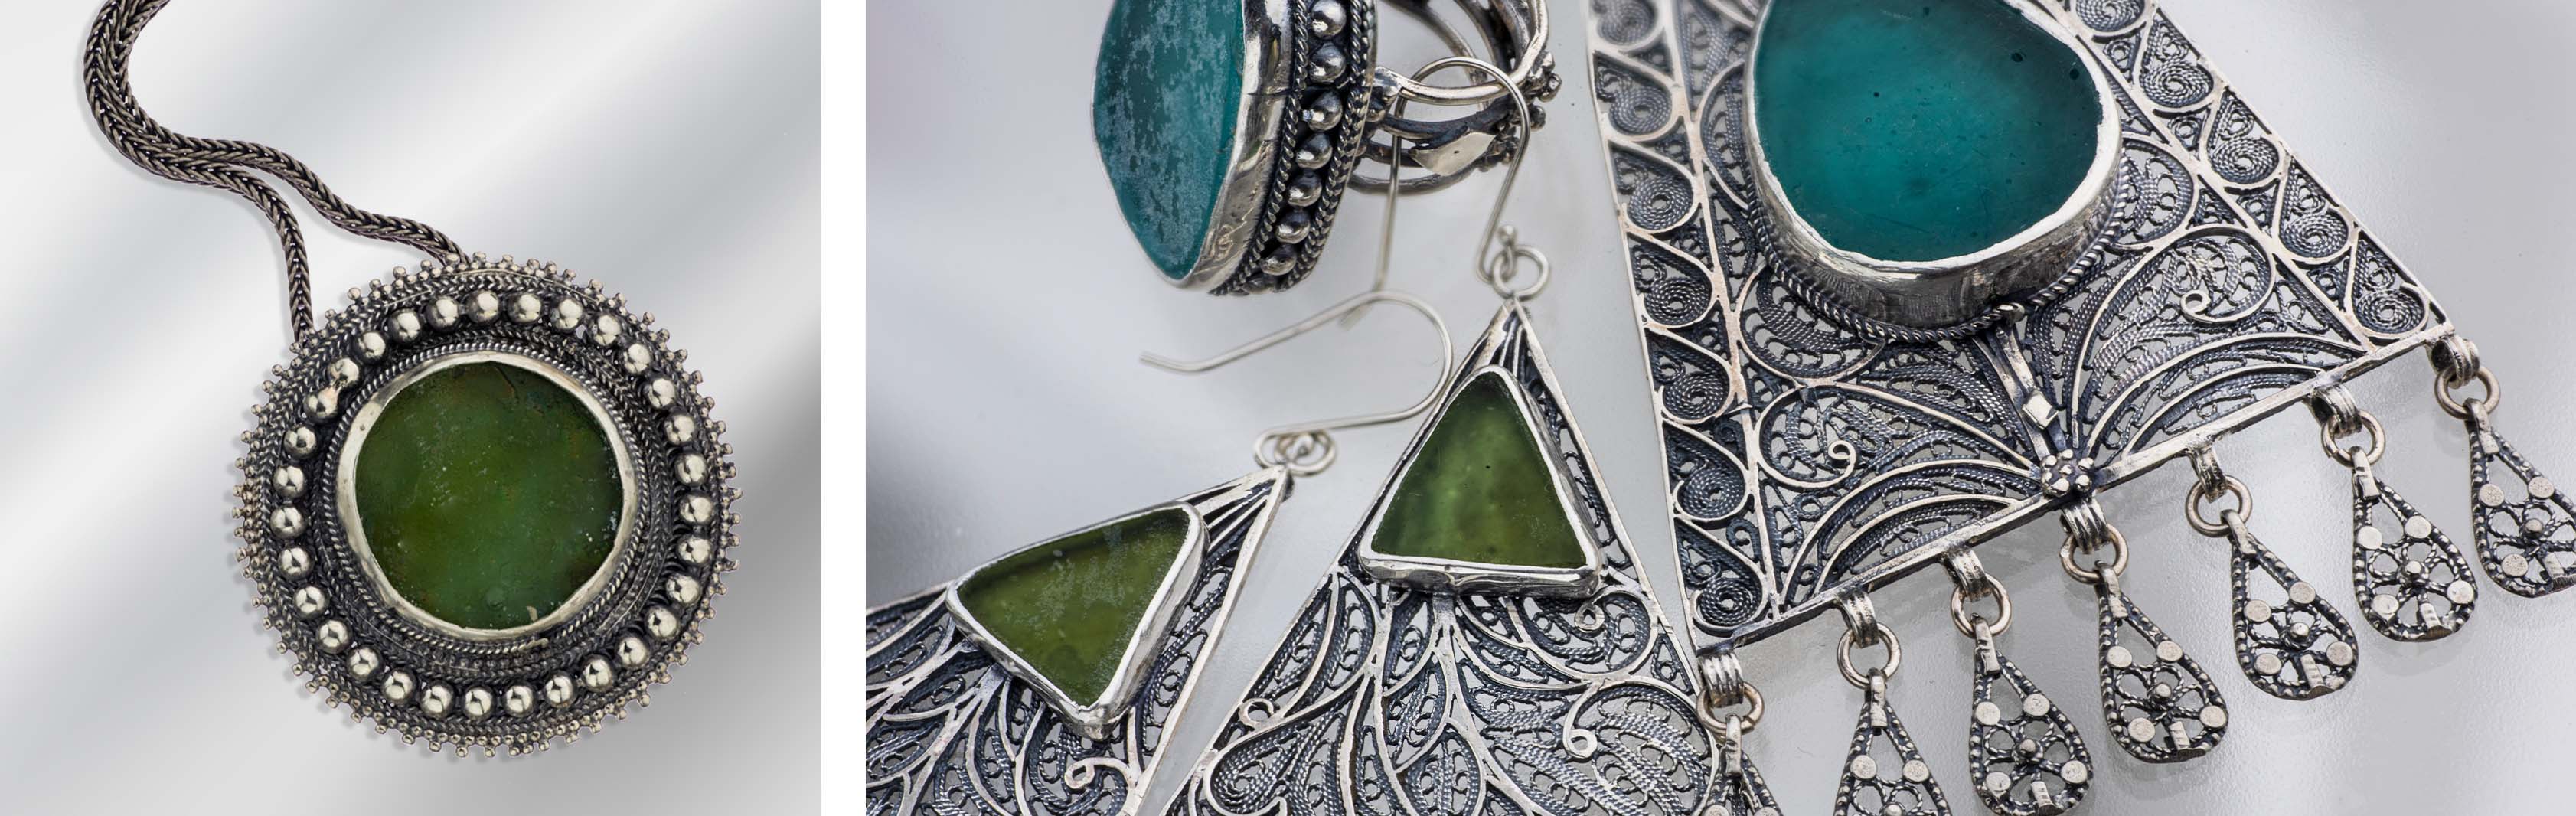 Amphora Collection | Handmade 925 Sterling Silver Yemenite Filigree Jewelry set with Ancient Roman Glass